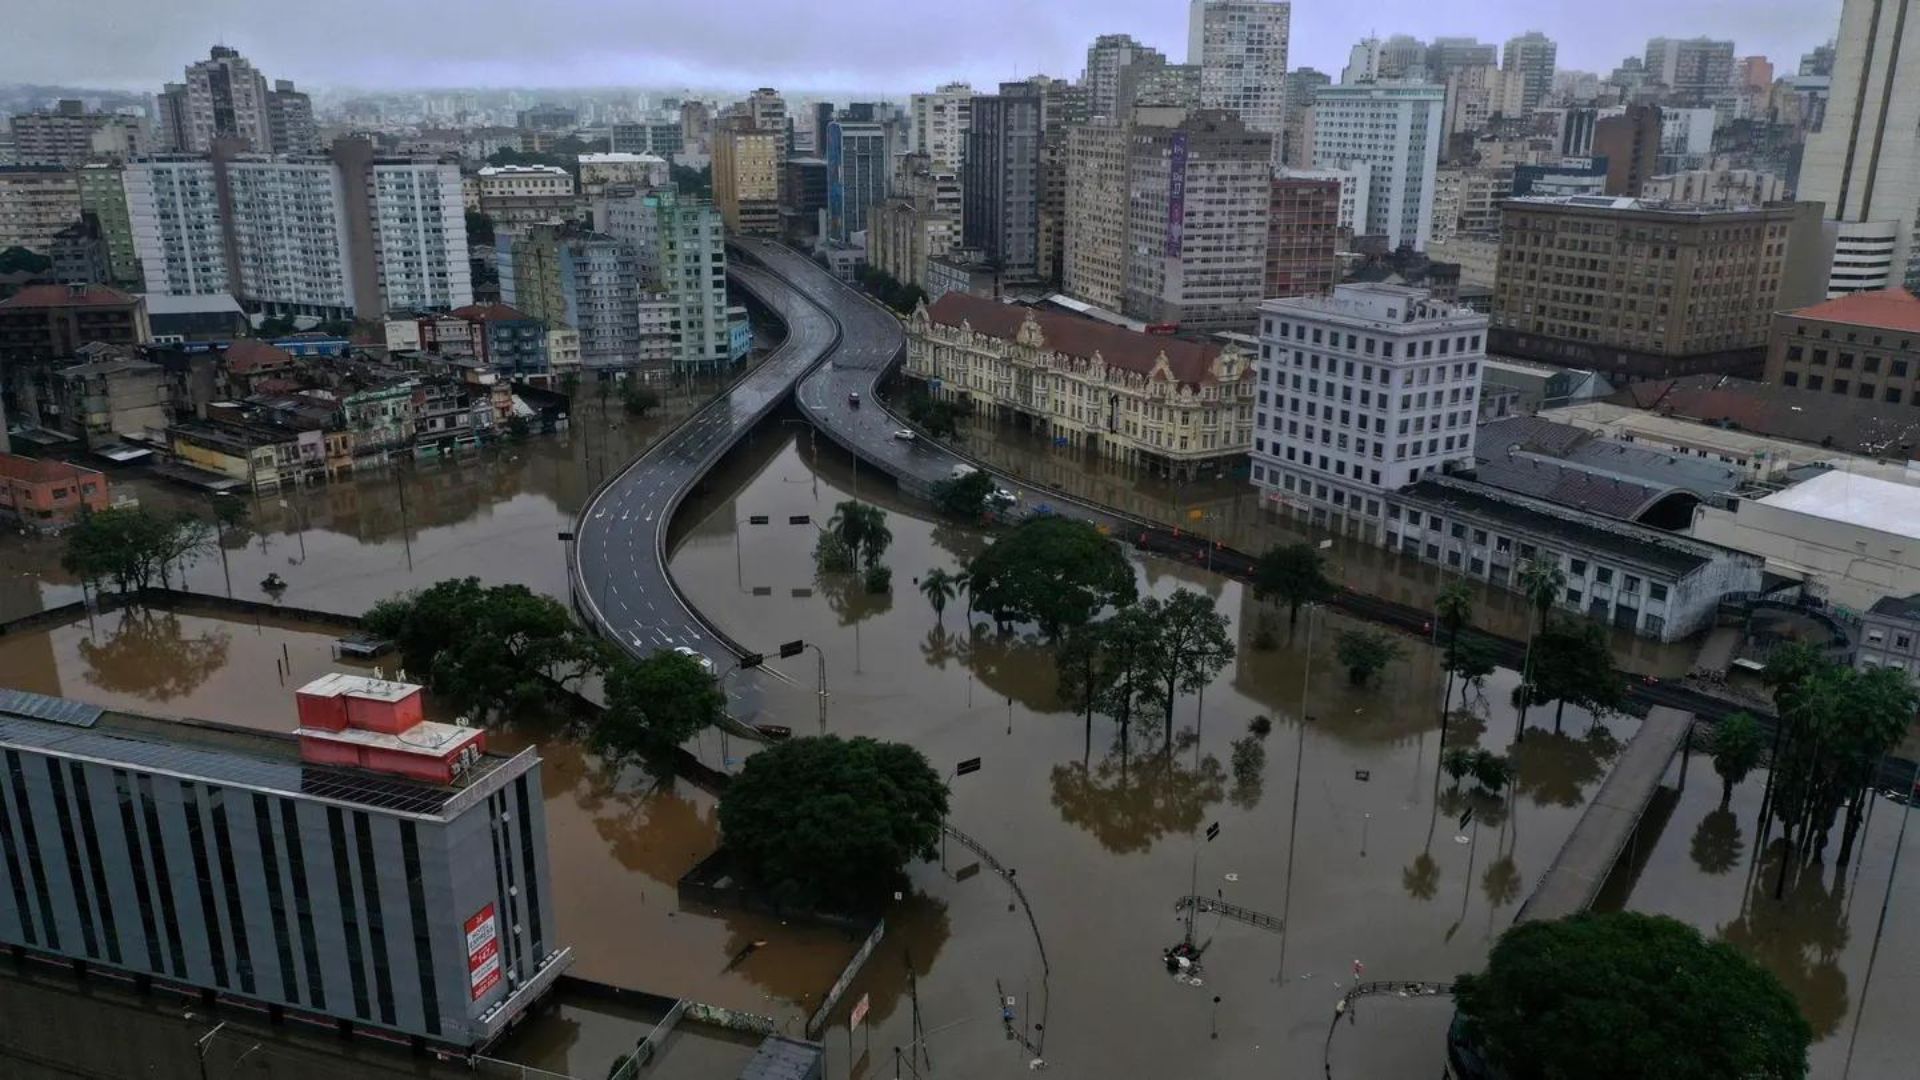 Global Flooding Crisis: Hundreds Dead As Disasters Unfold Worldwide